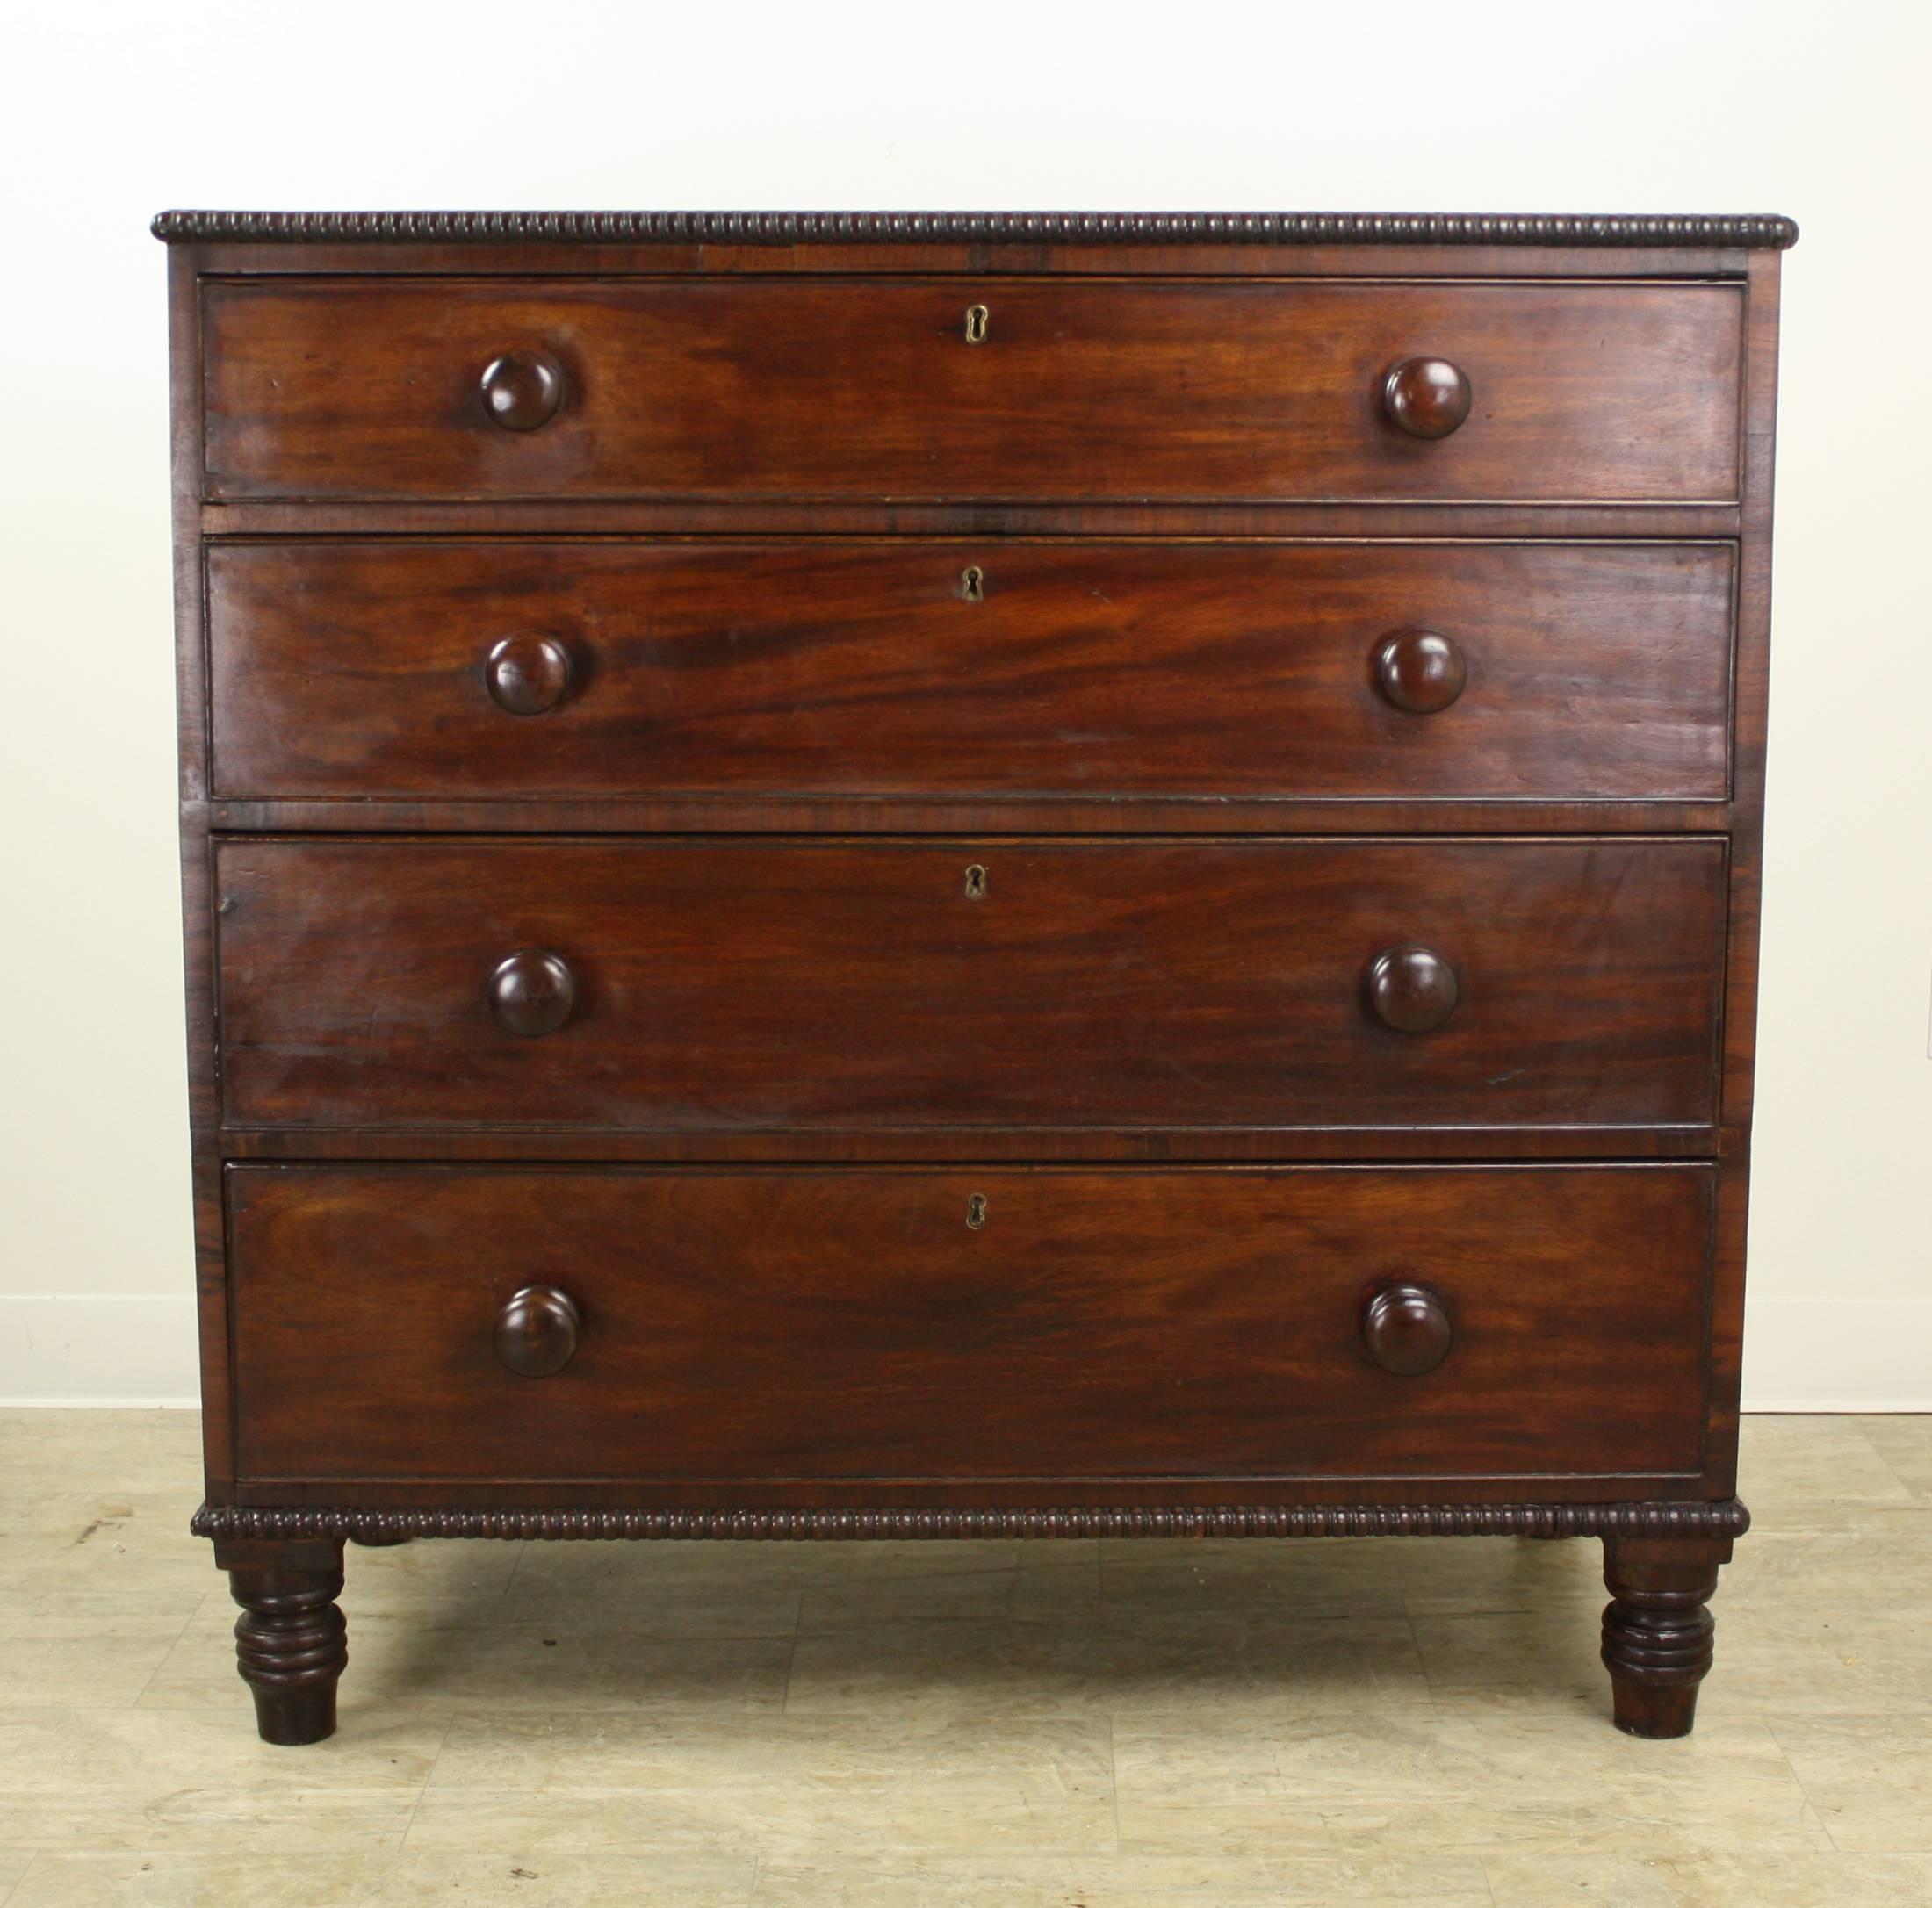 A charming mahogany chest with a traditional decorative bobbin edge. Four roomy drawers and lovely turned feet. The drawers slide easily and the top is in very good condition.